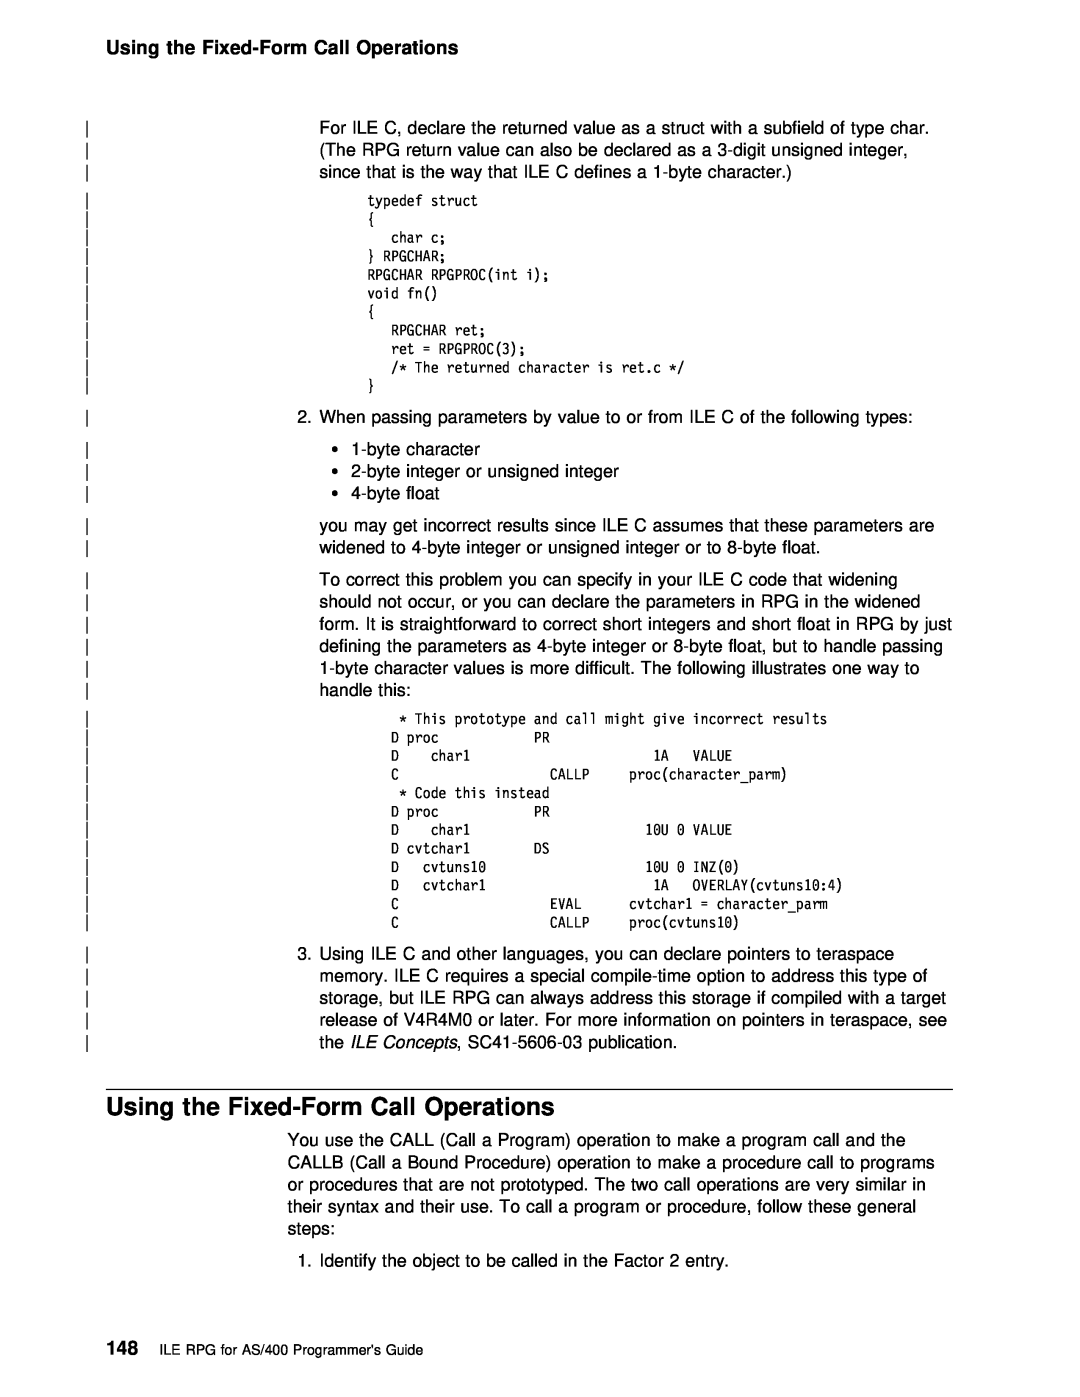 IBM AS/400 manual Call Operations, Using, V4R4M0, Fixed-Form Call 